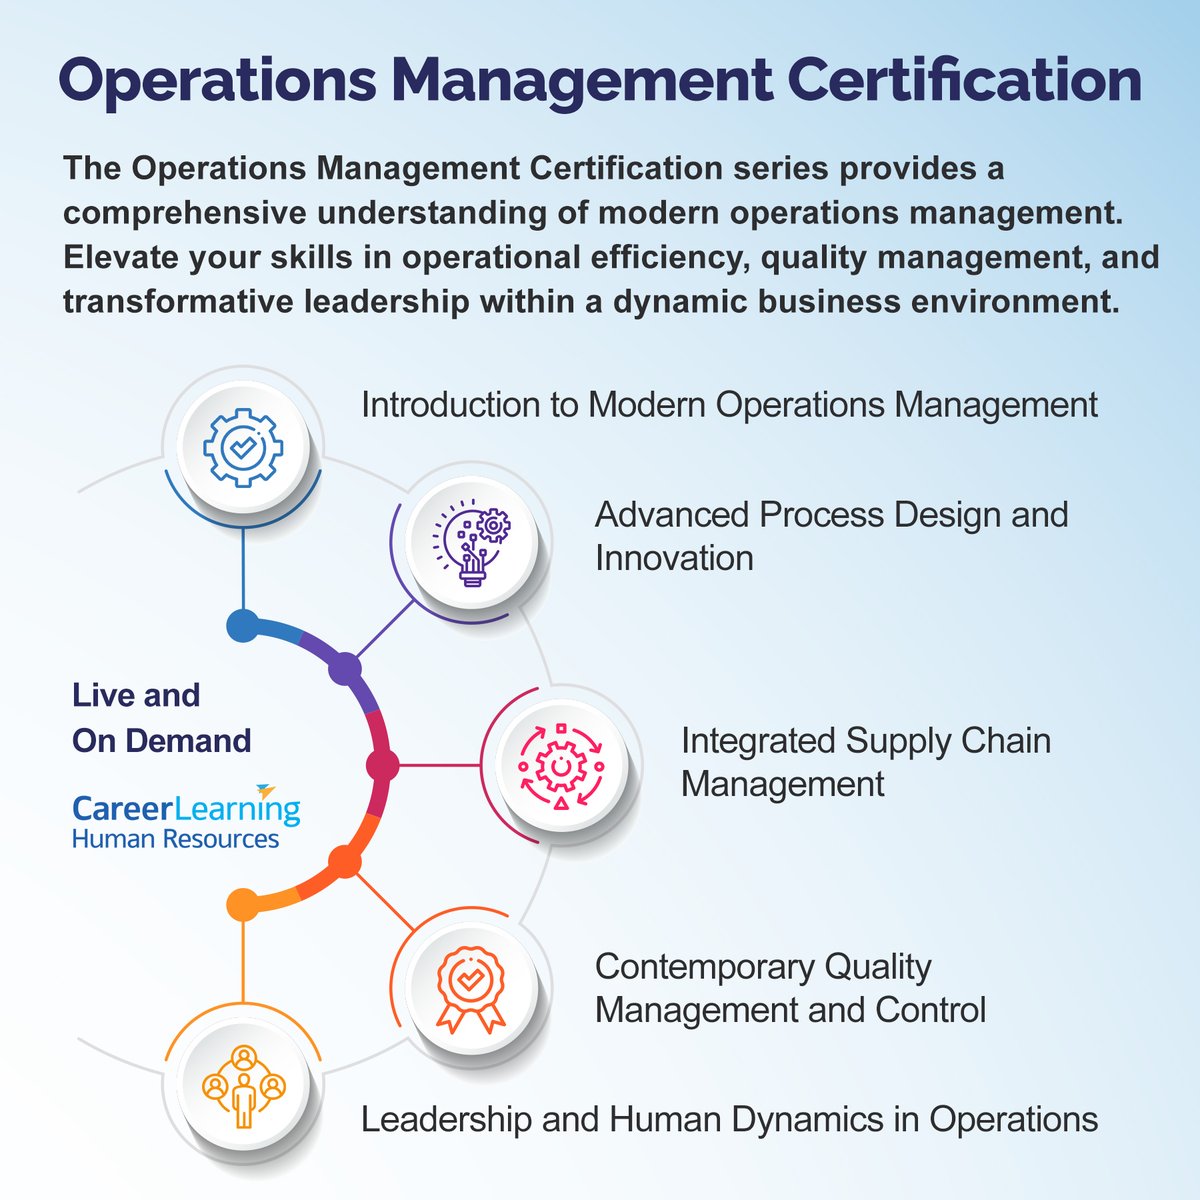 Get Certified in Operations Management! Boost your expertise in operational efficiency, quality mgmt, and leadership. Join our webinar series: May 20-24, 2024, 11AM EST. 
Register: bit.ly/OpsMgr2024

#OperationsManagement #LeanManagement #ChangeManagement #CareerLearning